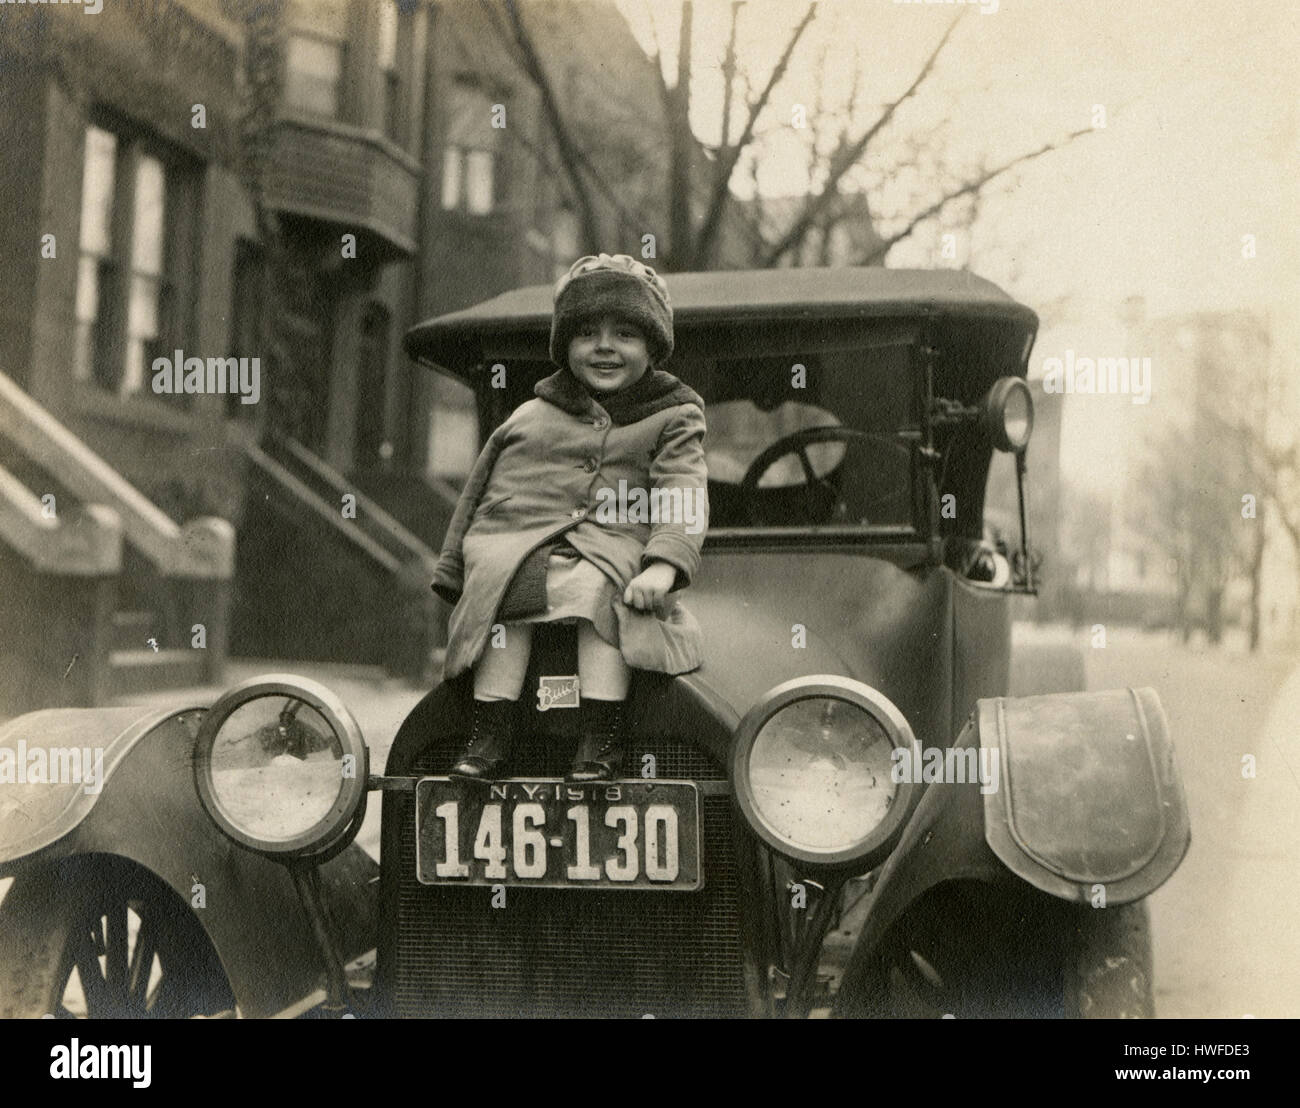 Antique c1918 photograph, little girl on the hood of a 1918 Buick with New York license plate. Location is possibly Brooklyn, New York. See Alamy HWFDD1 for an alternate view of this image. SOURCE: ORIGINAL PHOTOGRAPHIC PRINT. Stock Photo